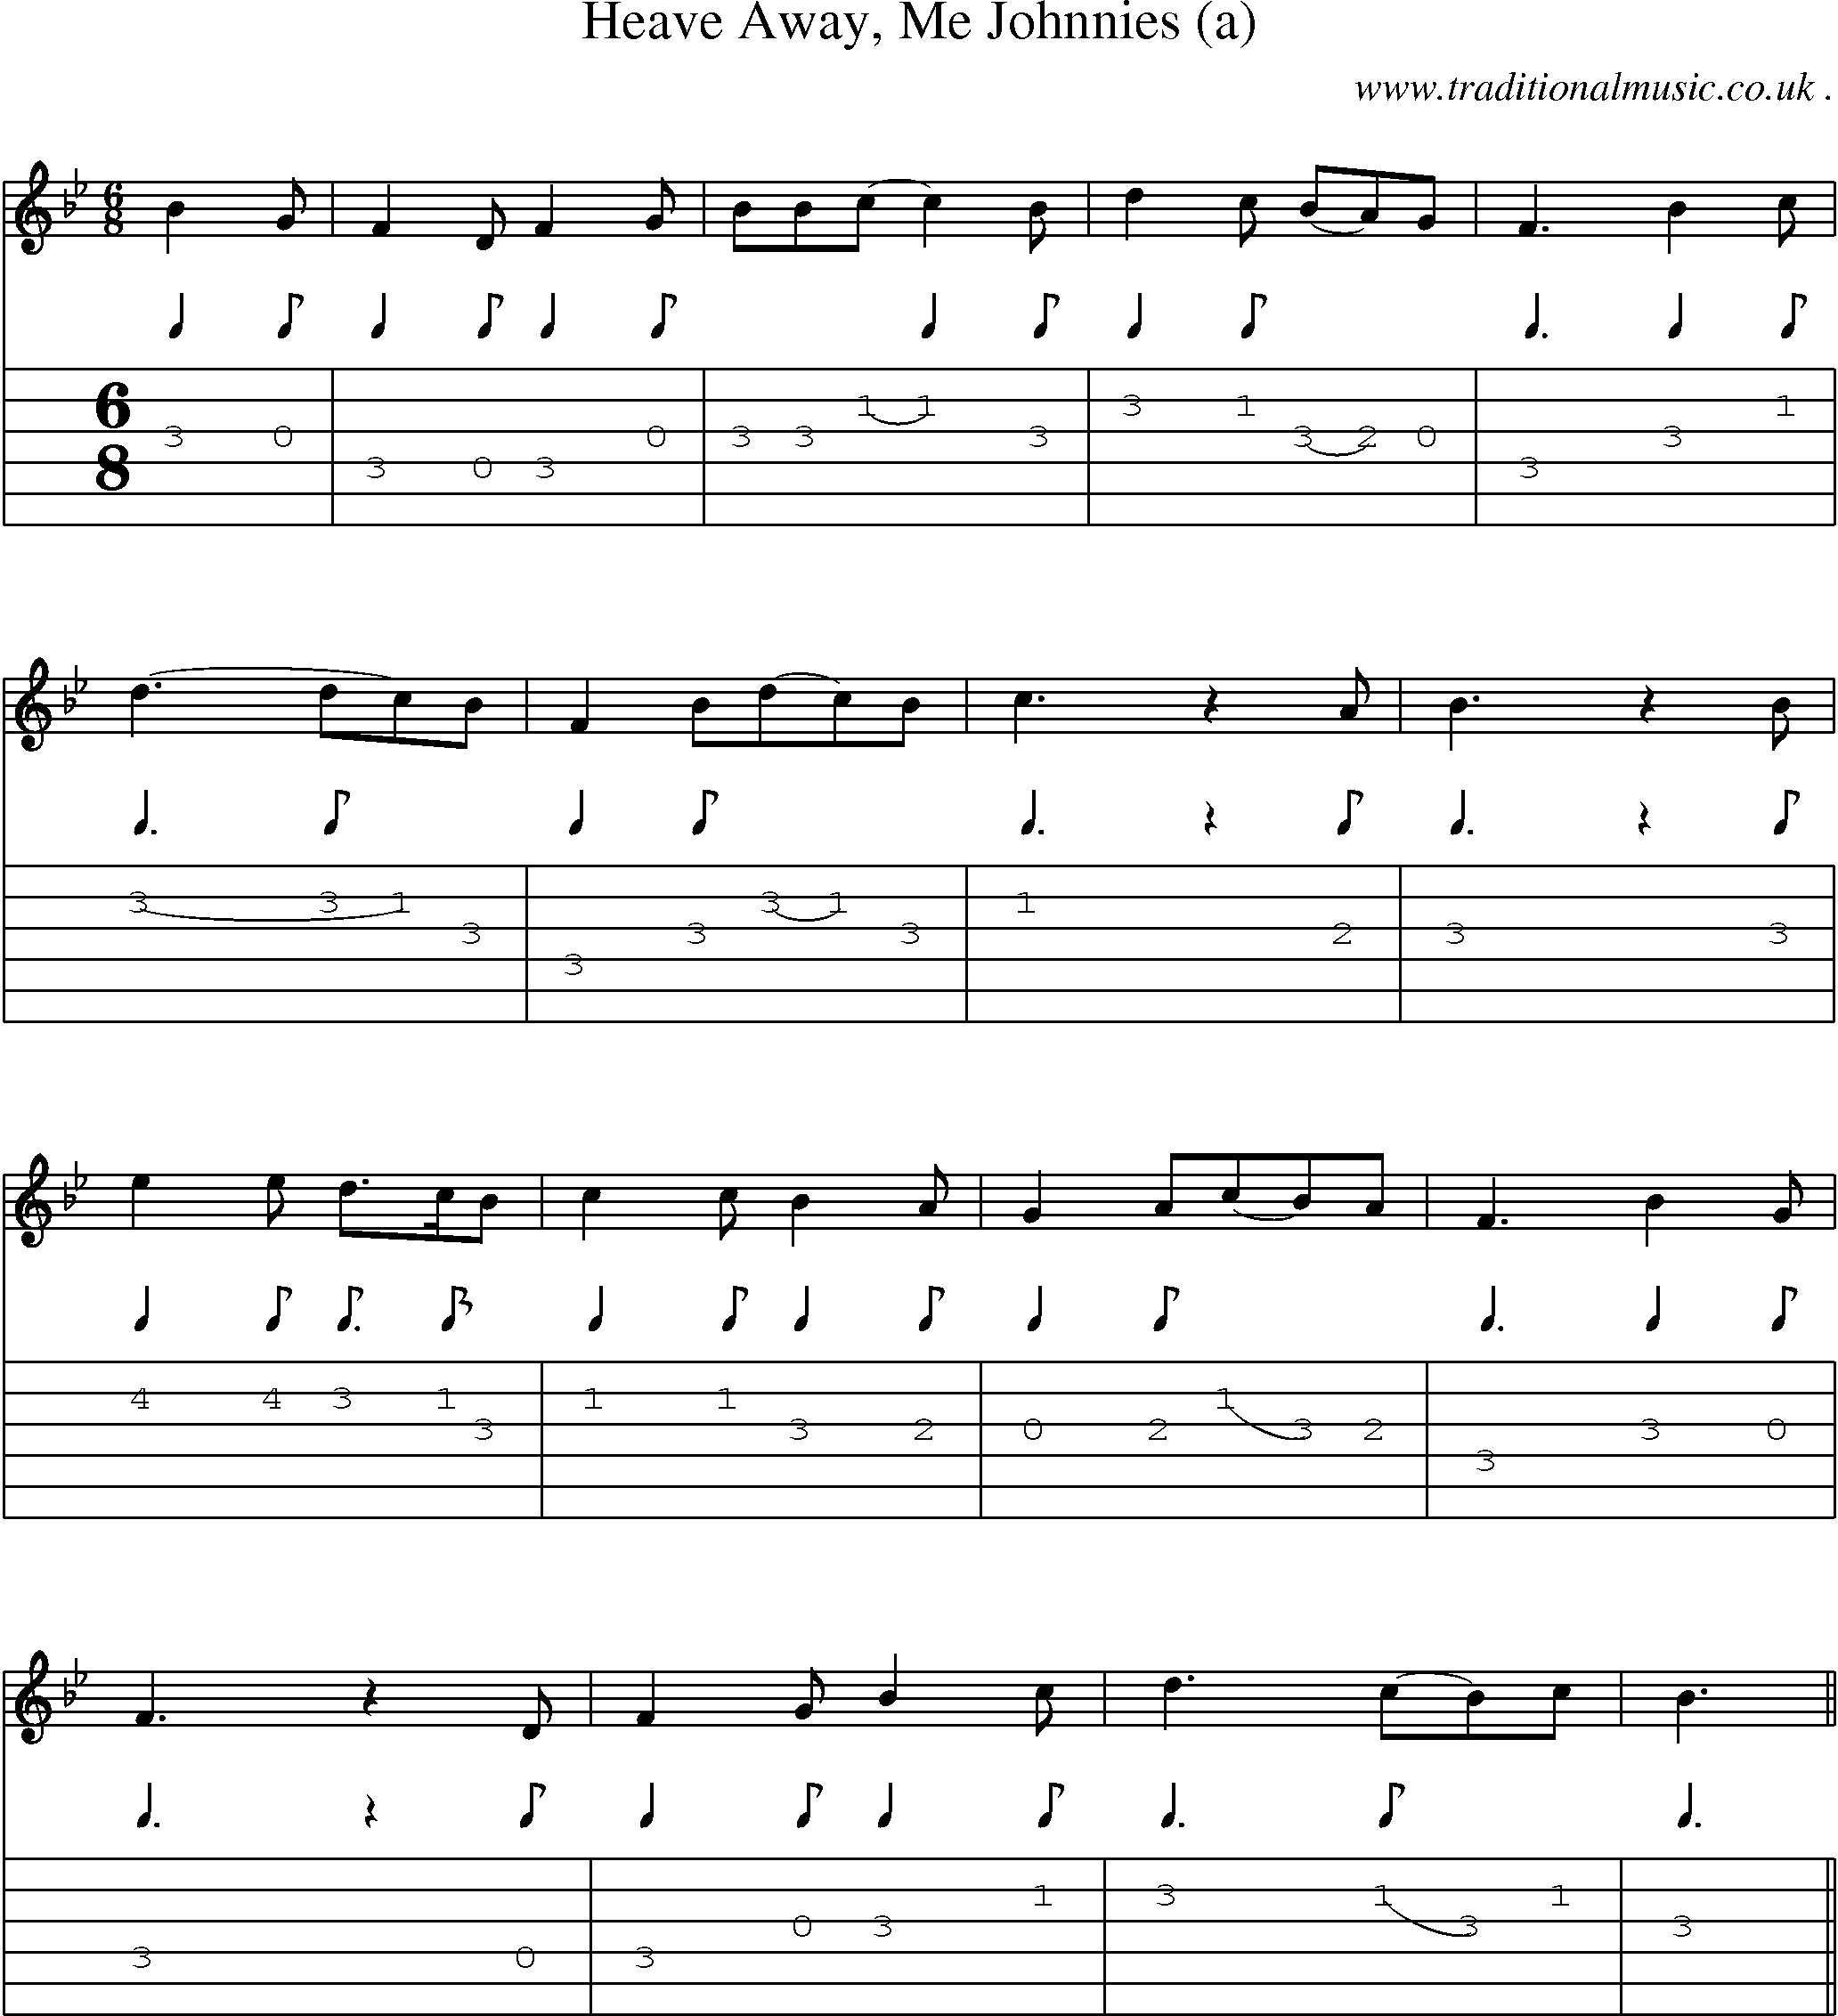 Sheet-Music and Guitar Tabs for Heave Away Me Johnnies (a)